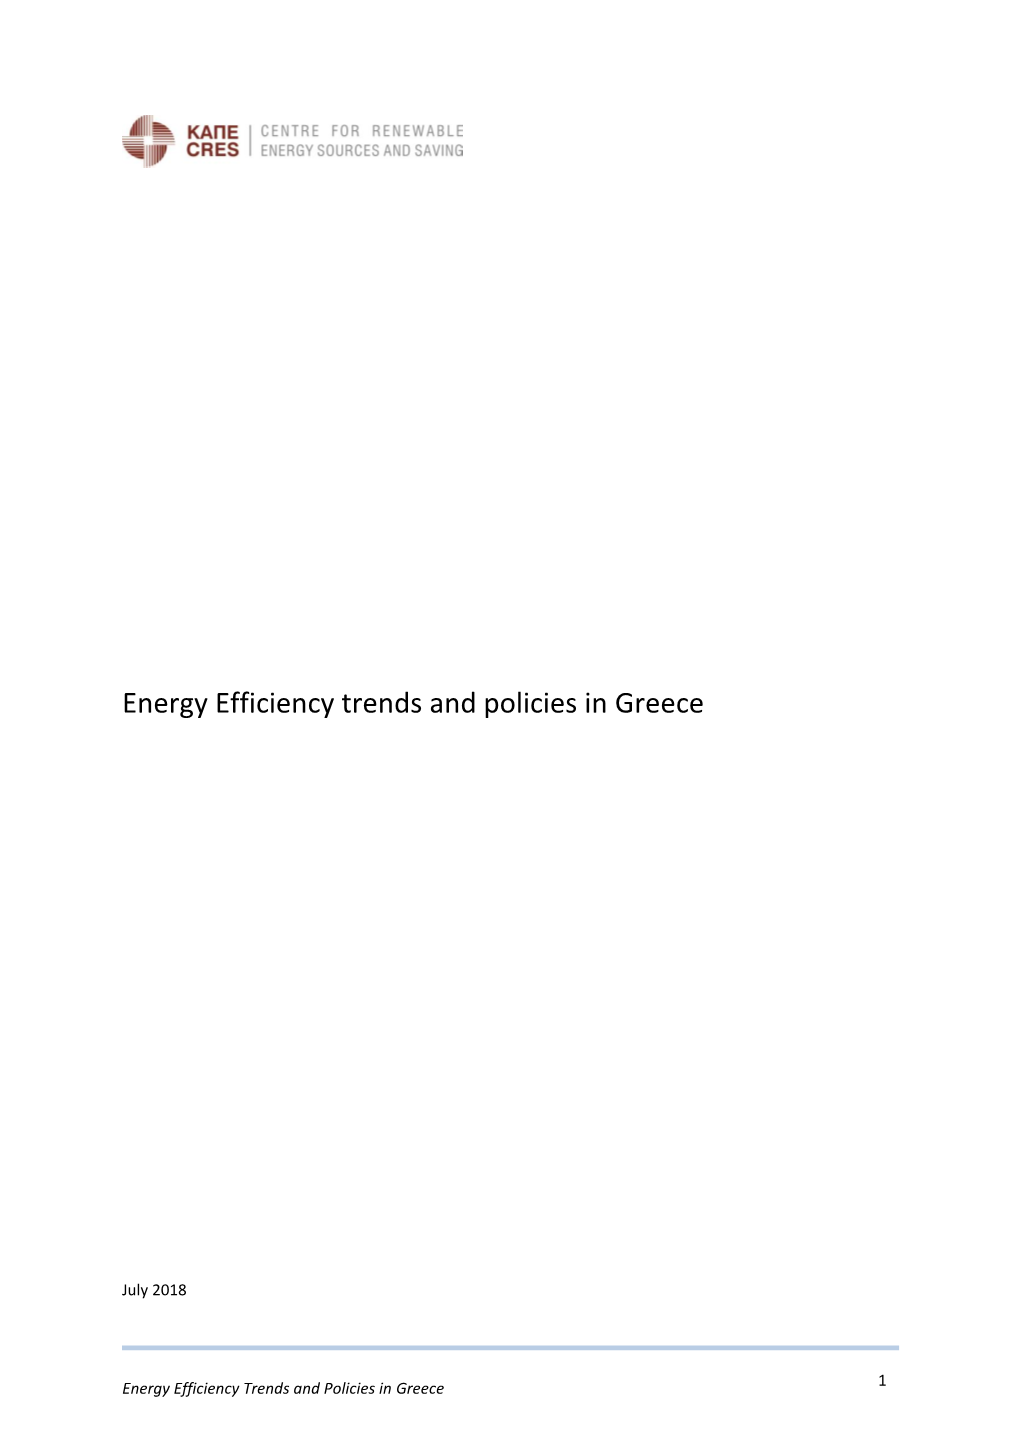 Energy Efficiency Trends and Policies in Greece